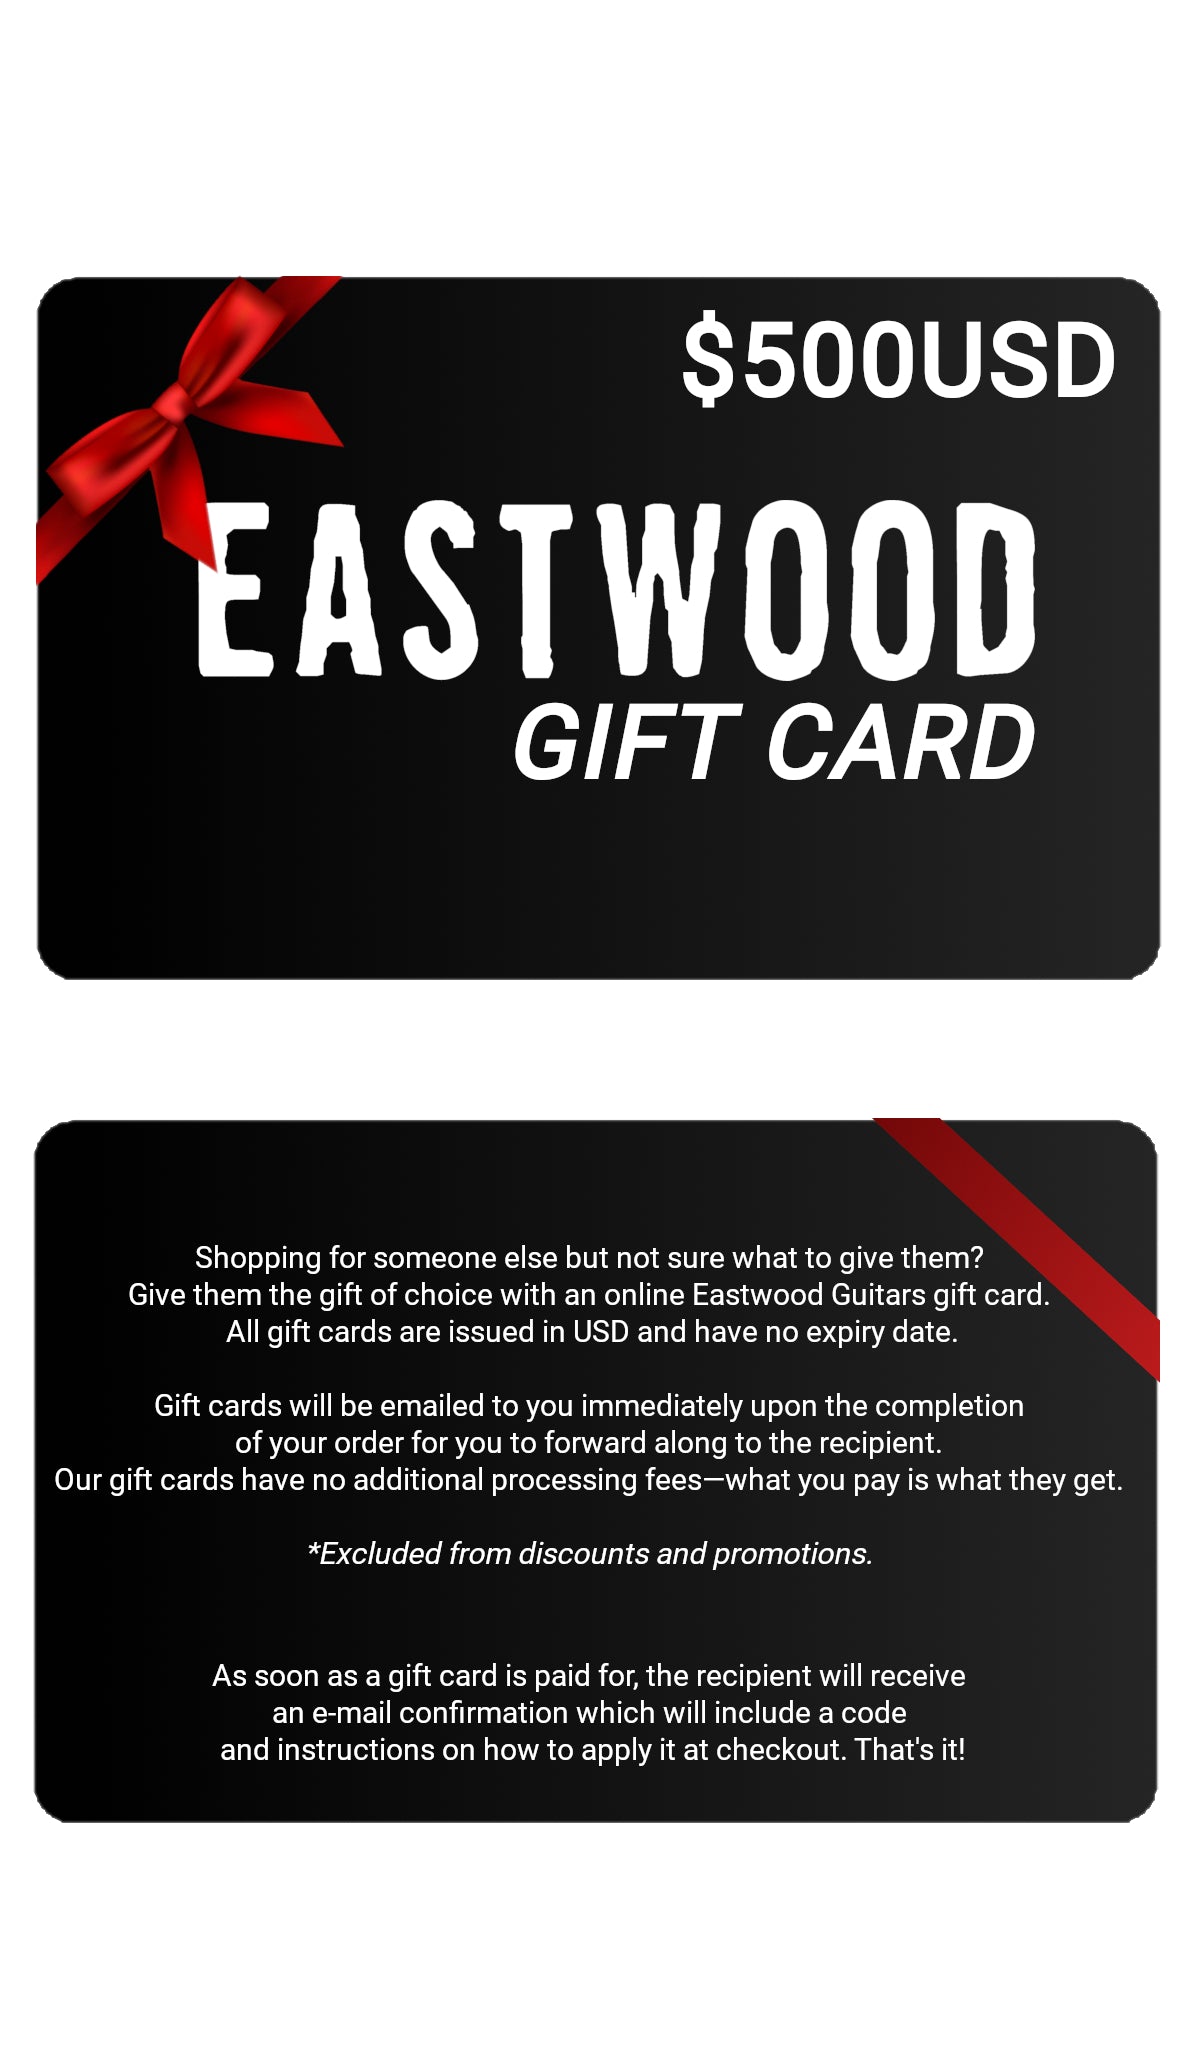 Eastwood Guitars Eastwood Gift Cards $500